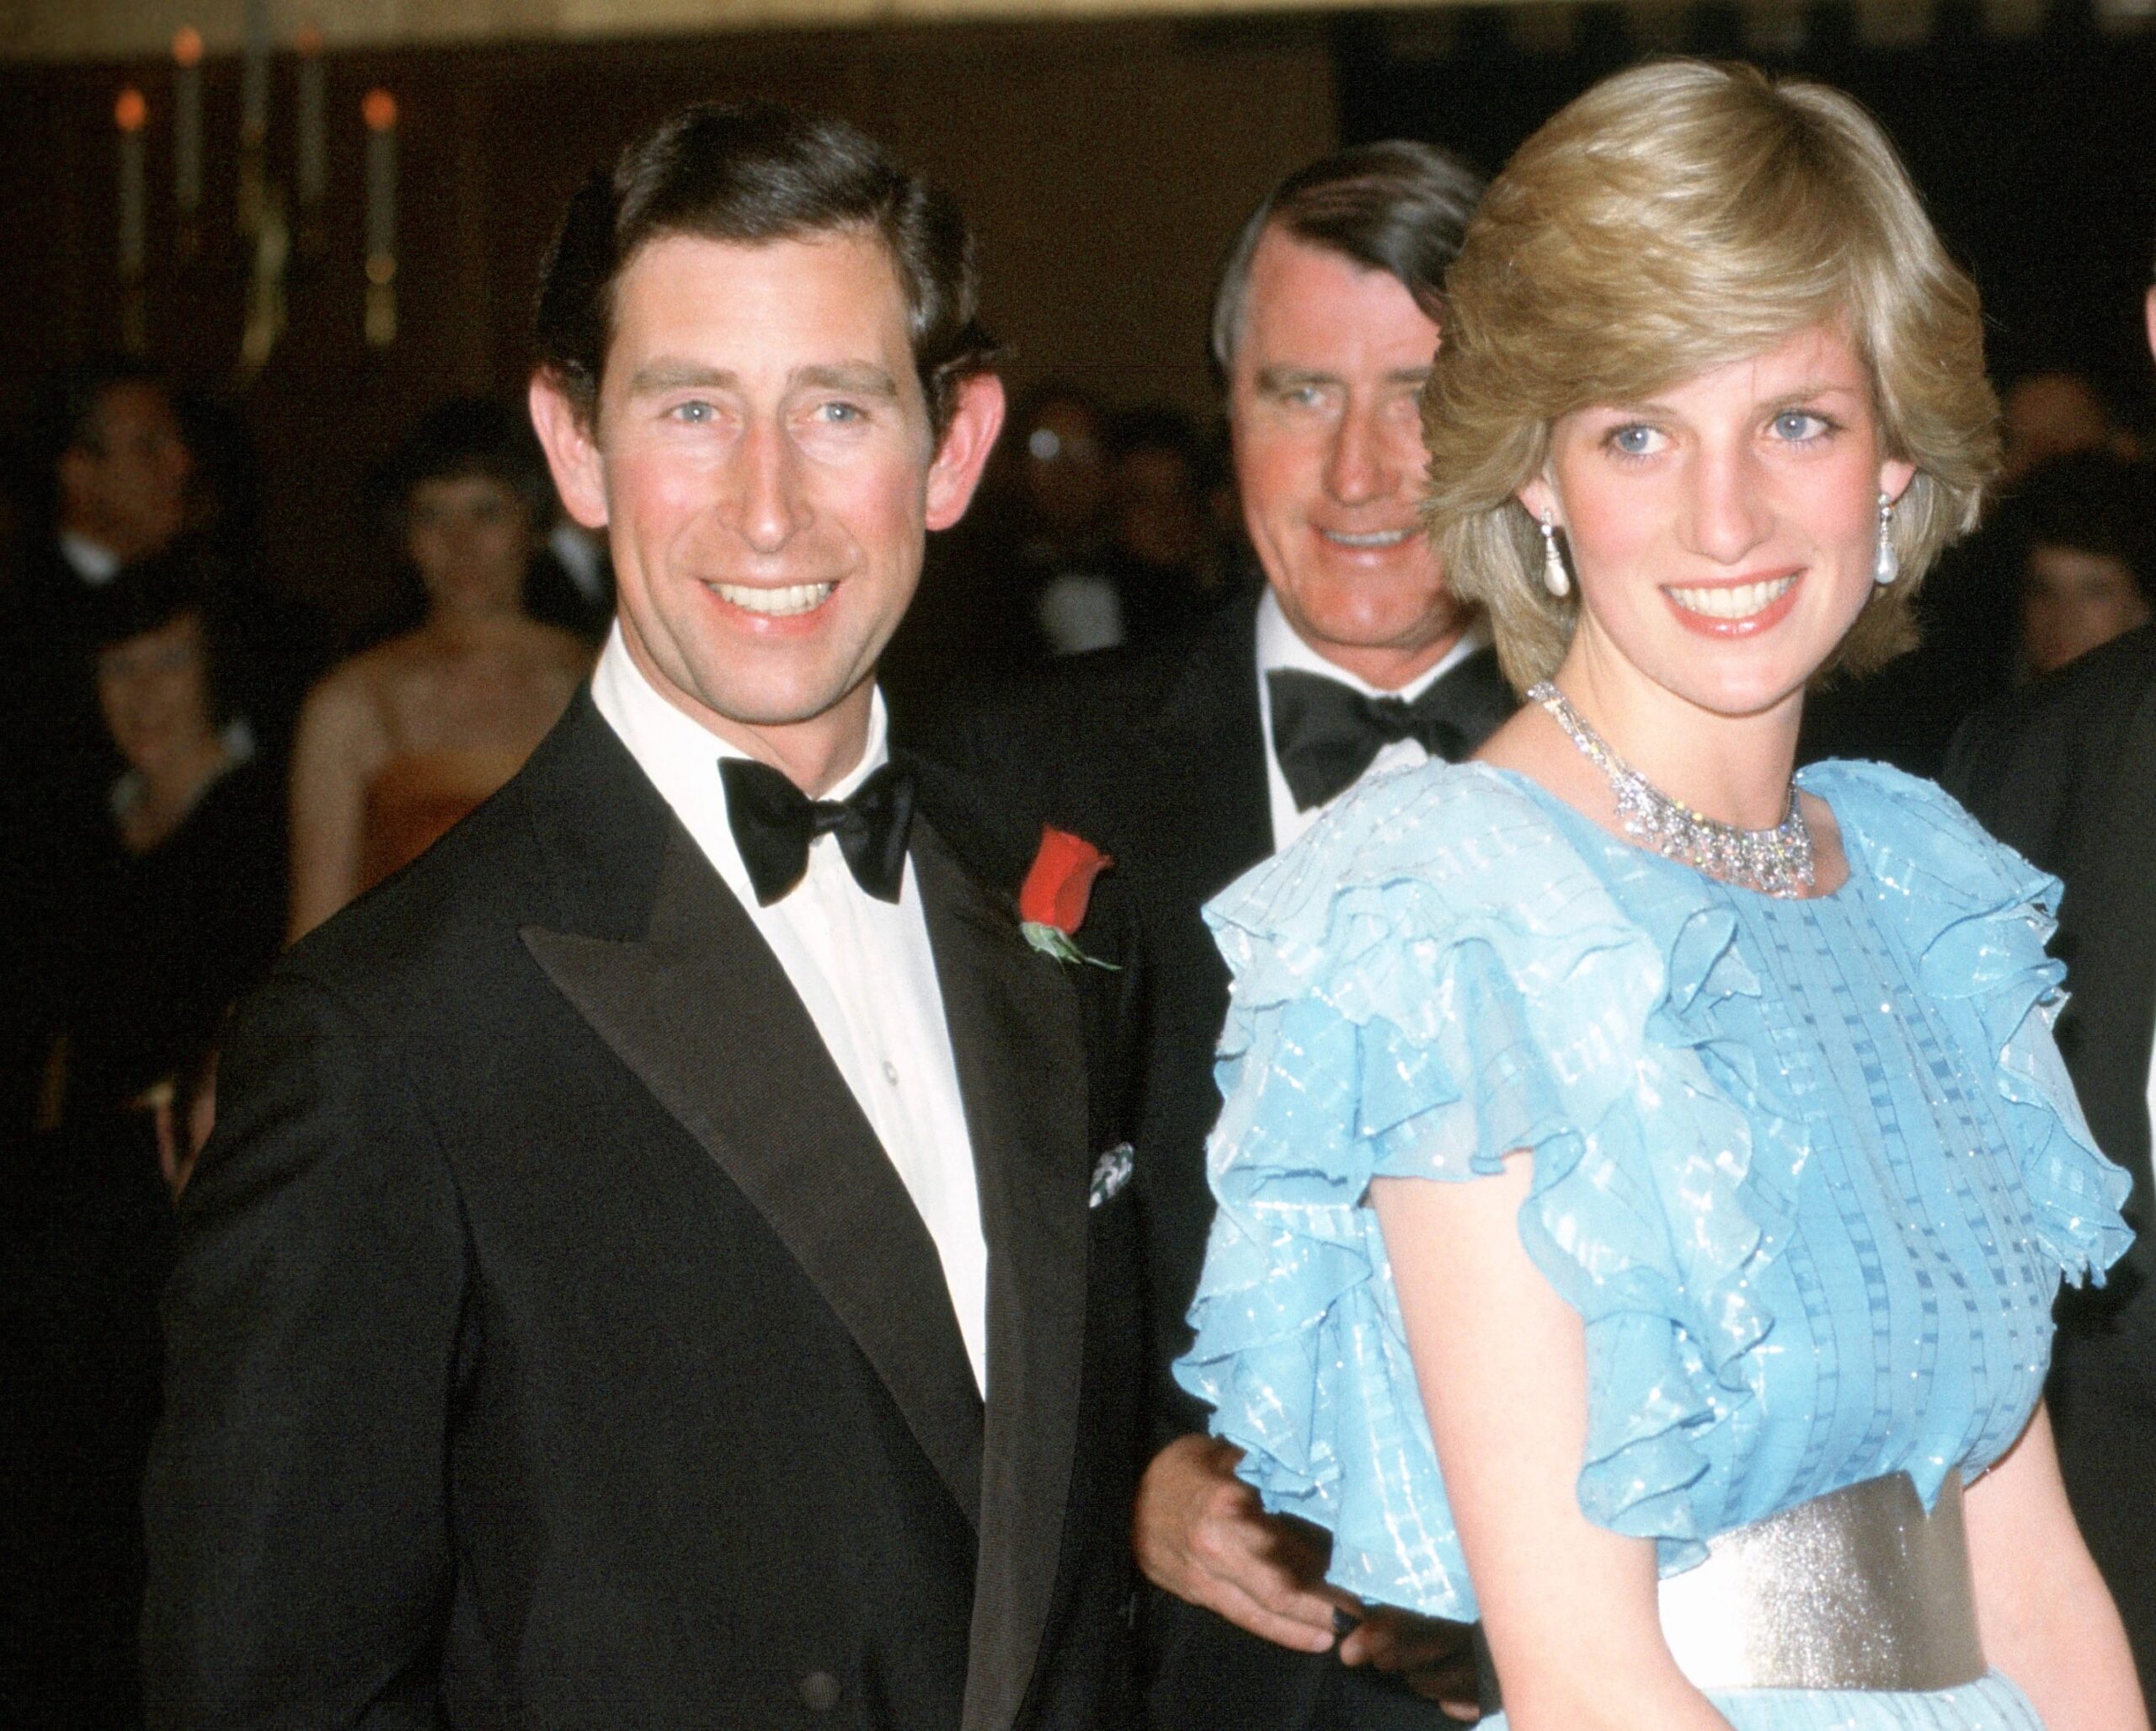 The Crown sparks fury over plans to air King Charles' split from Diana at 'delicate time'